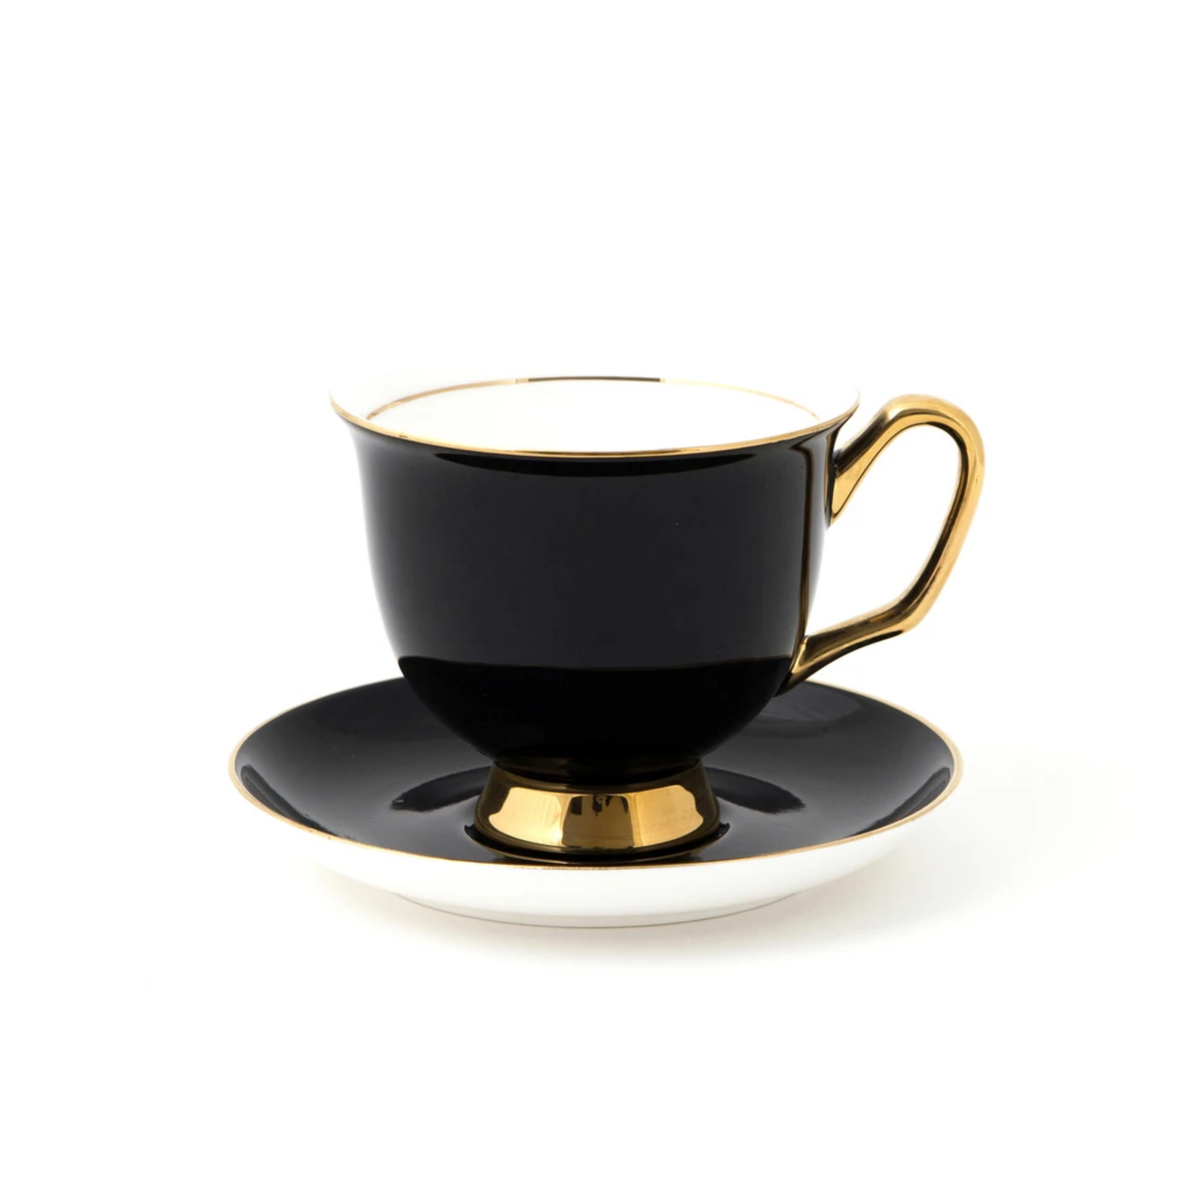 BLACK TEACUP AND SAUCER - EXTRA LARGE 375ML